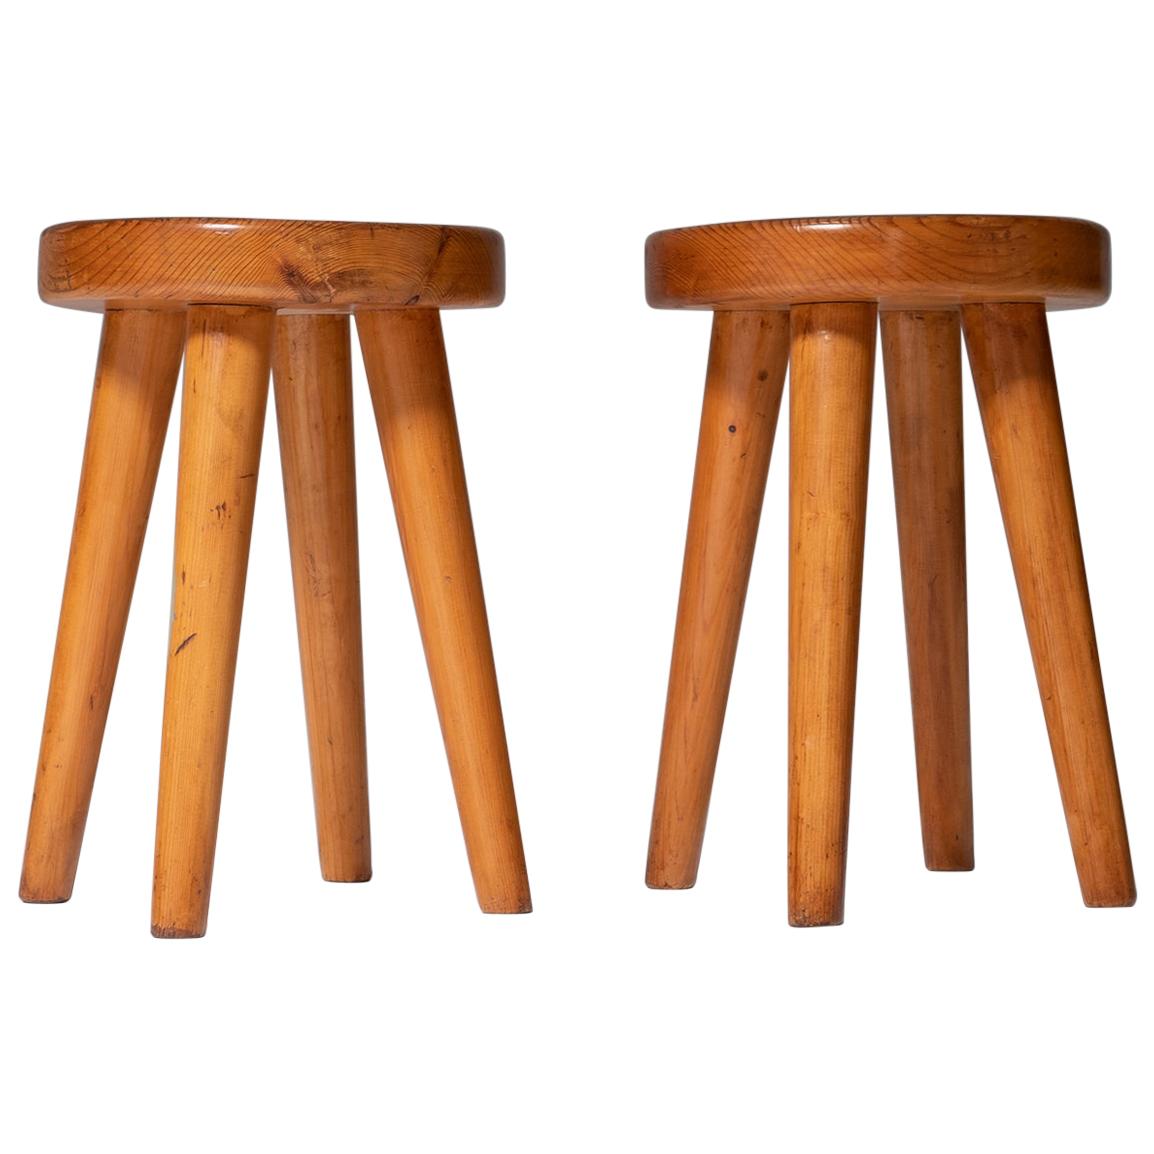 Pair of French Mid-Century Modern Stools in Solid Pine